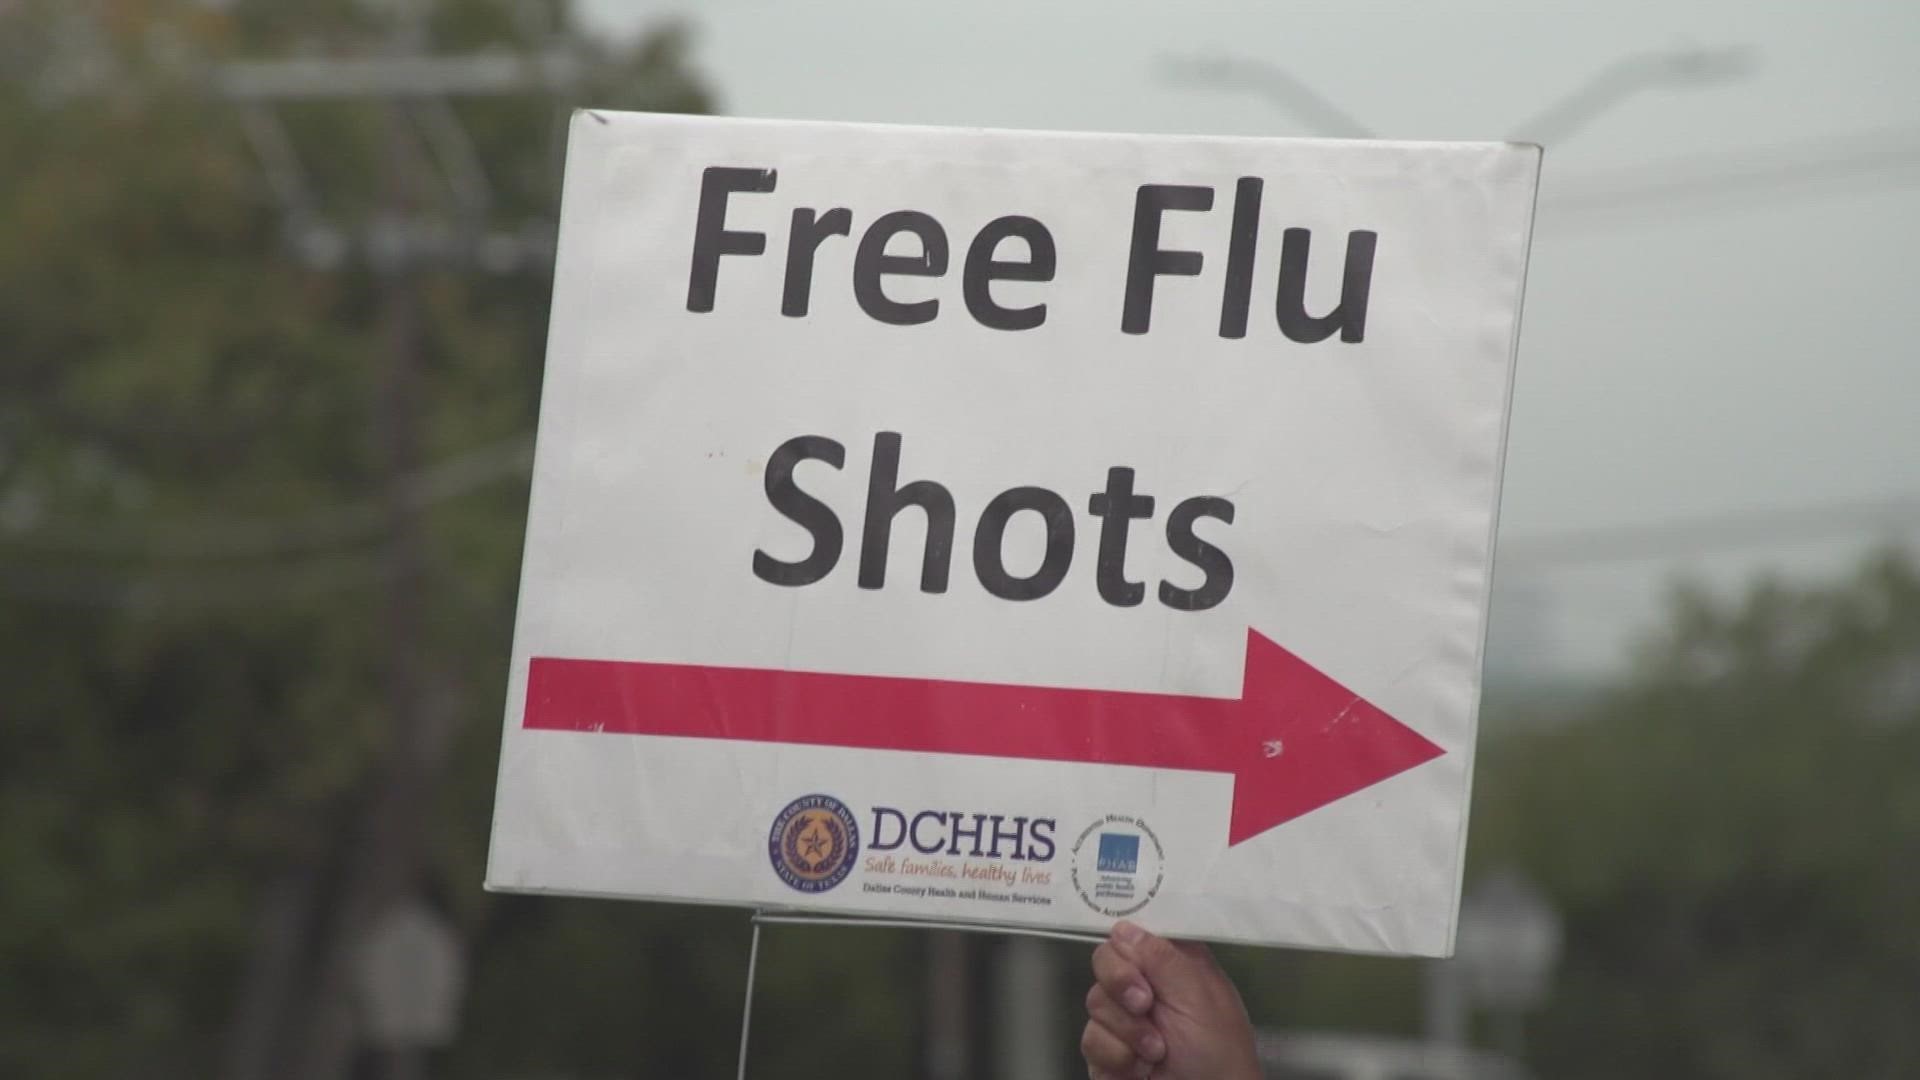 DCHHS is offering flu clinics and pop-up immunization across the county. Workers are encouraging residents to be proactive in getting vaccine, as holidays approach.